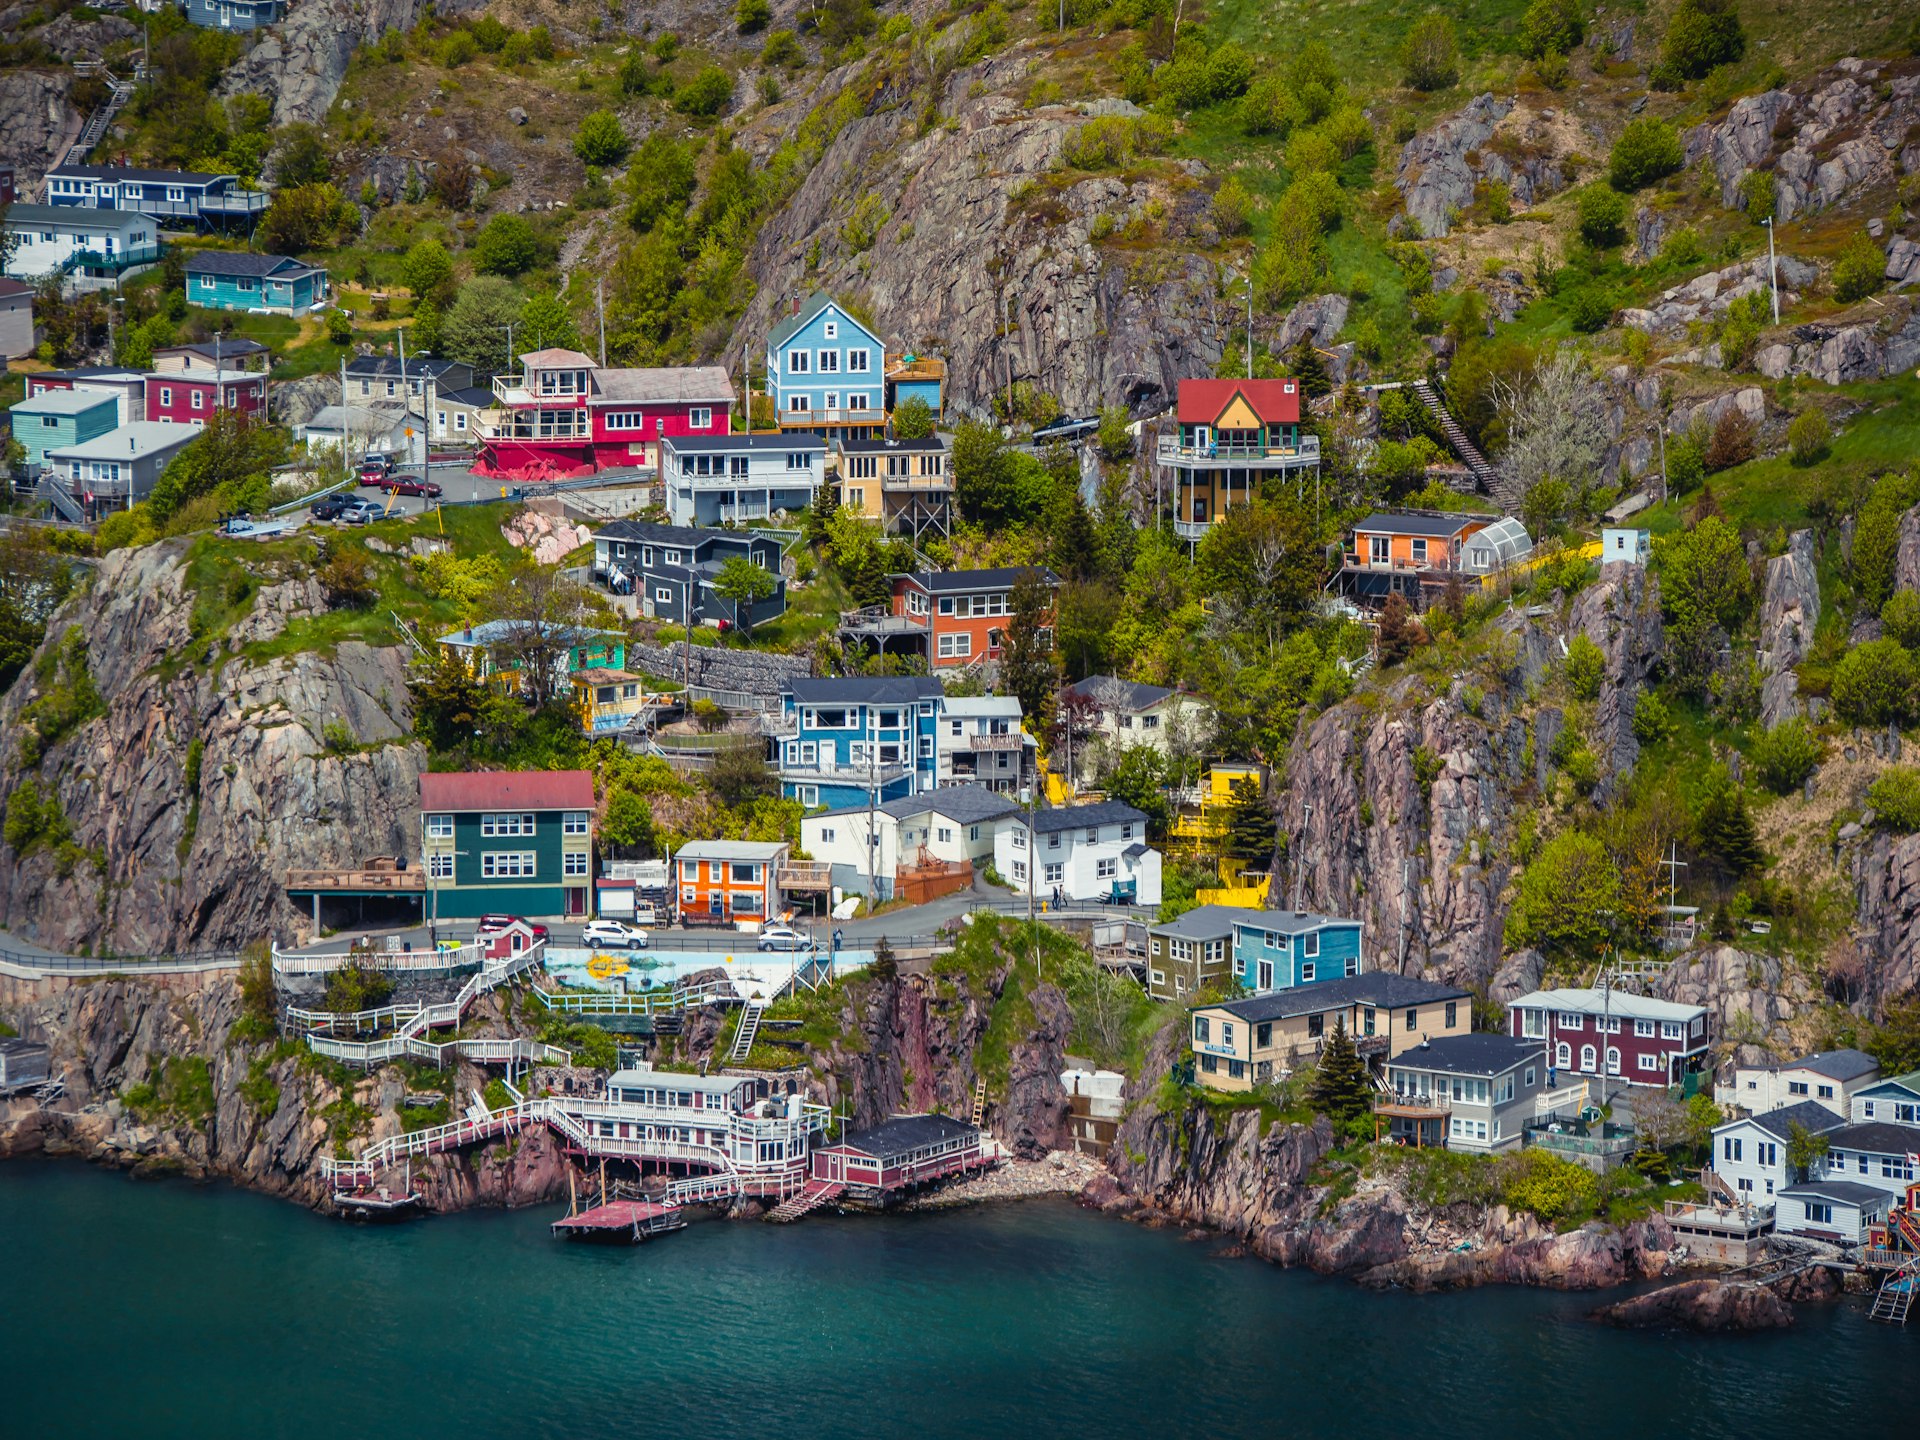 Buildings on the side of a rocky mountain by the sea at St. Johns, Newfoundland, Canada